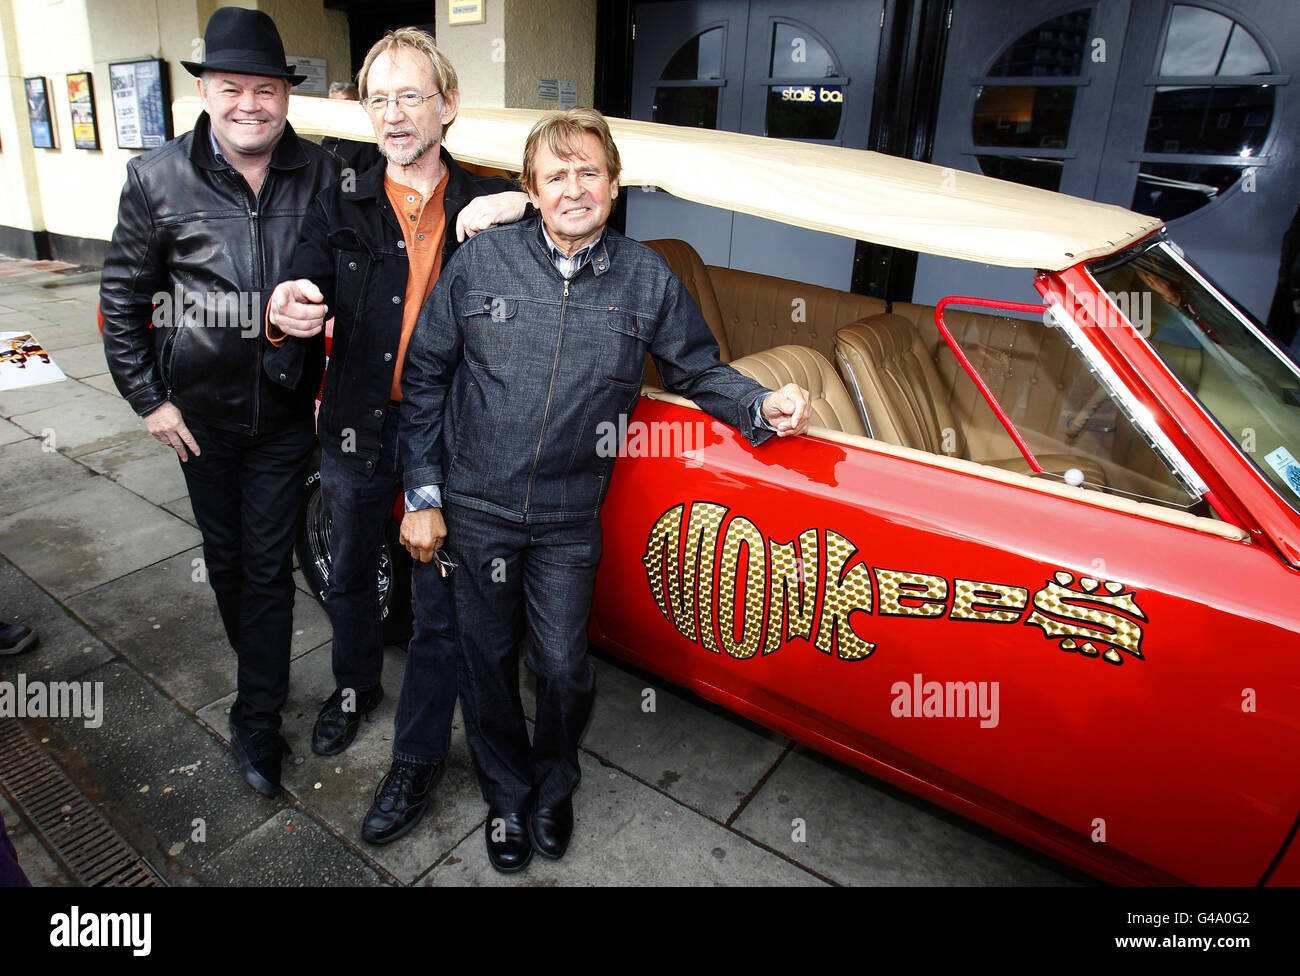 (Left - right) Peter Tork, Micky Dolenz and Davy Jones of the Monkees attend a photocall at the O2 Apollo, Manchester, ahead of their UK tour. Stock Photo